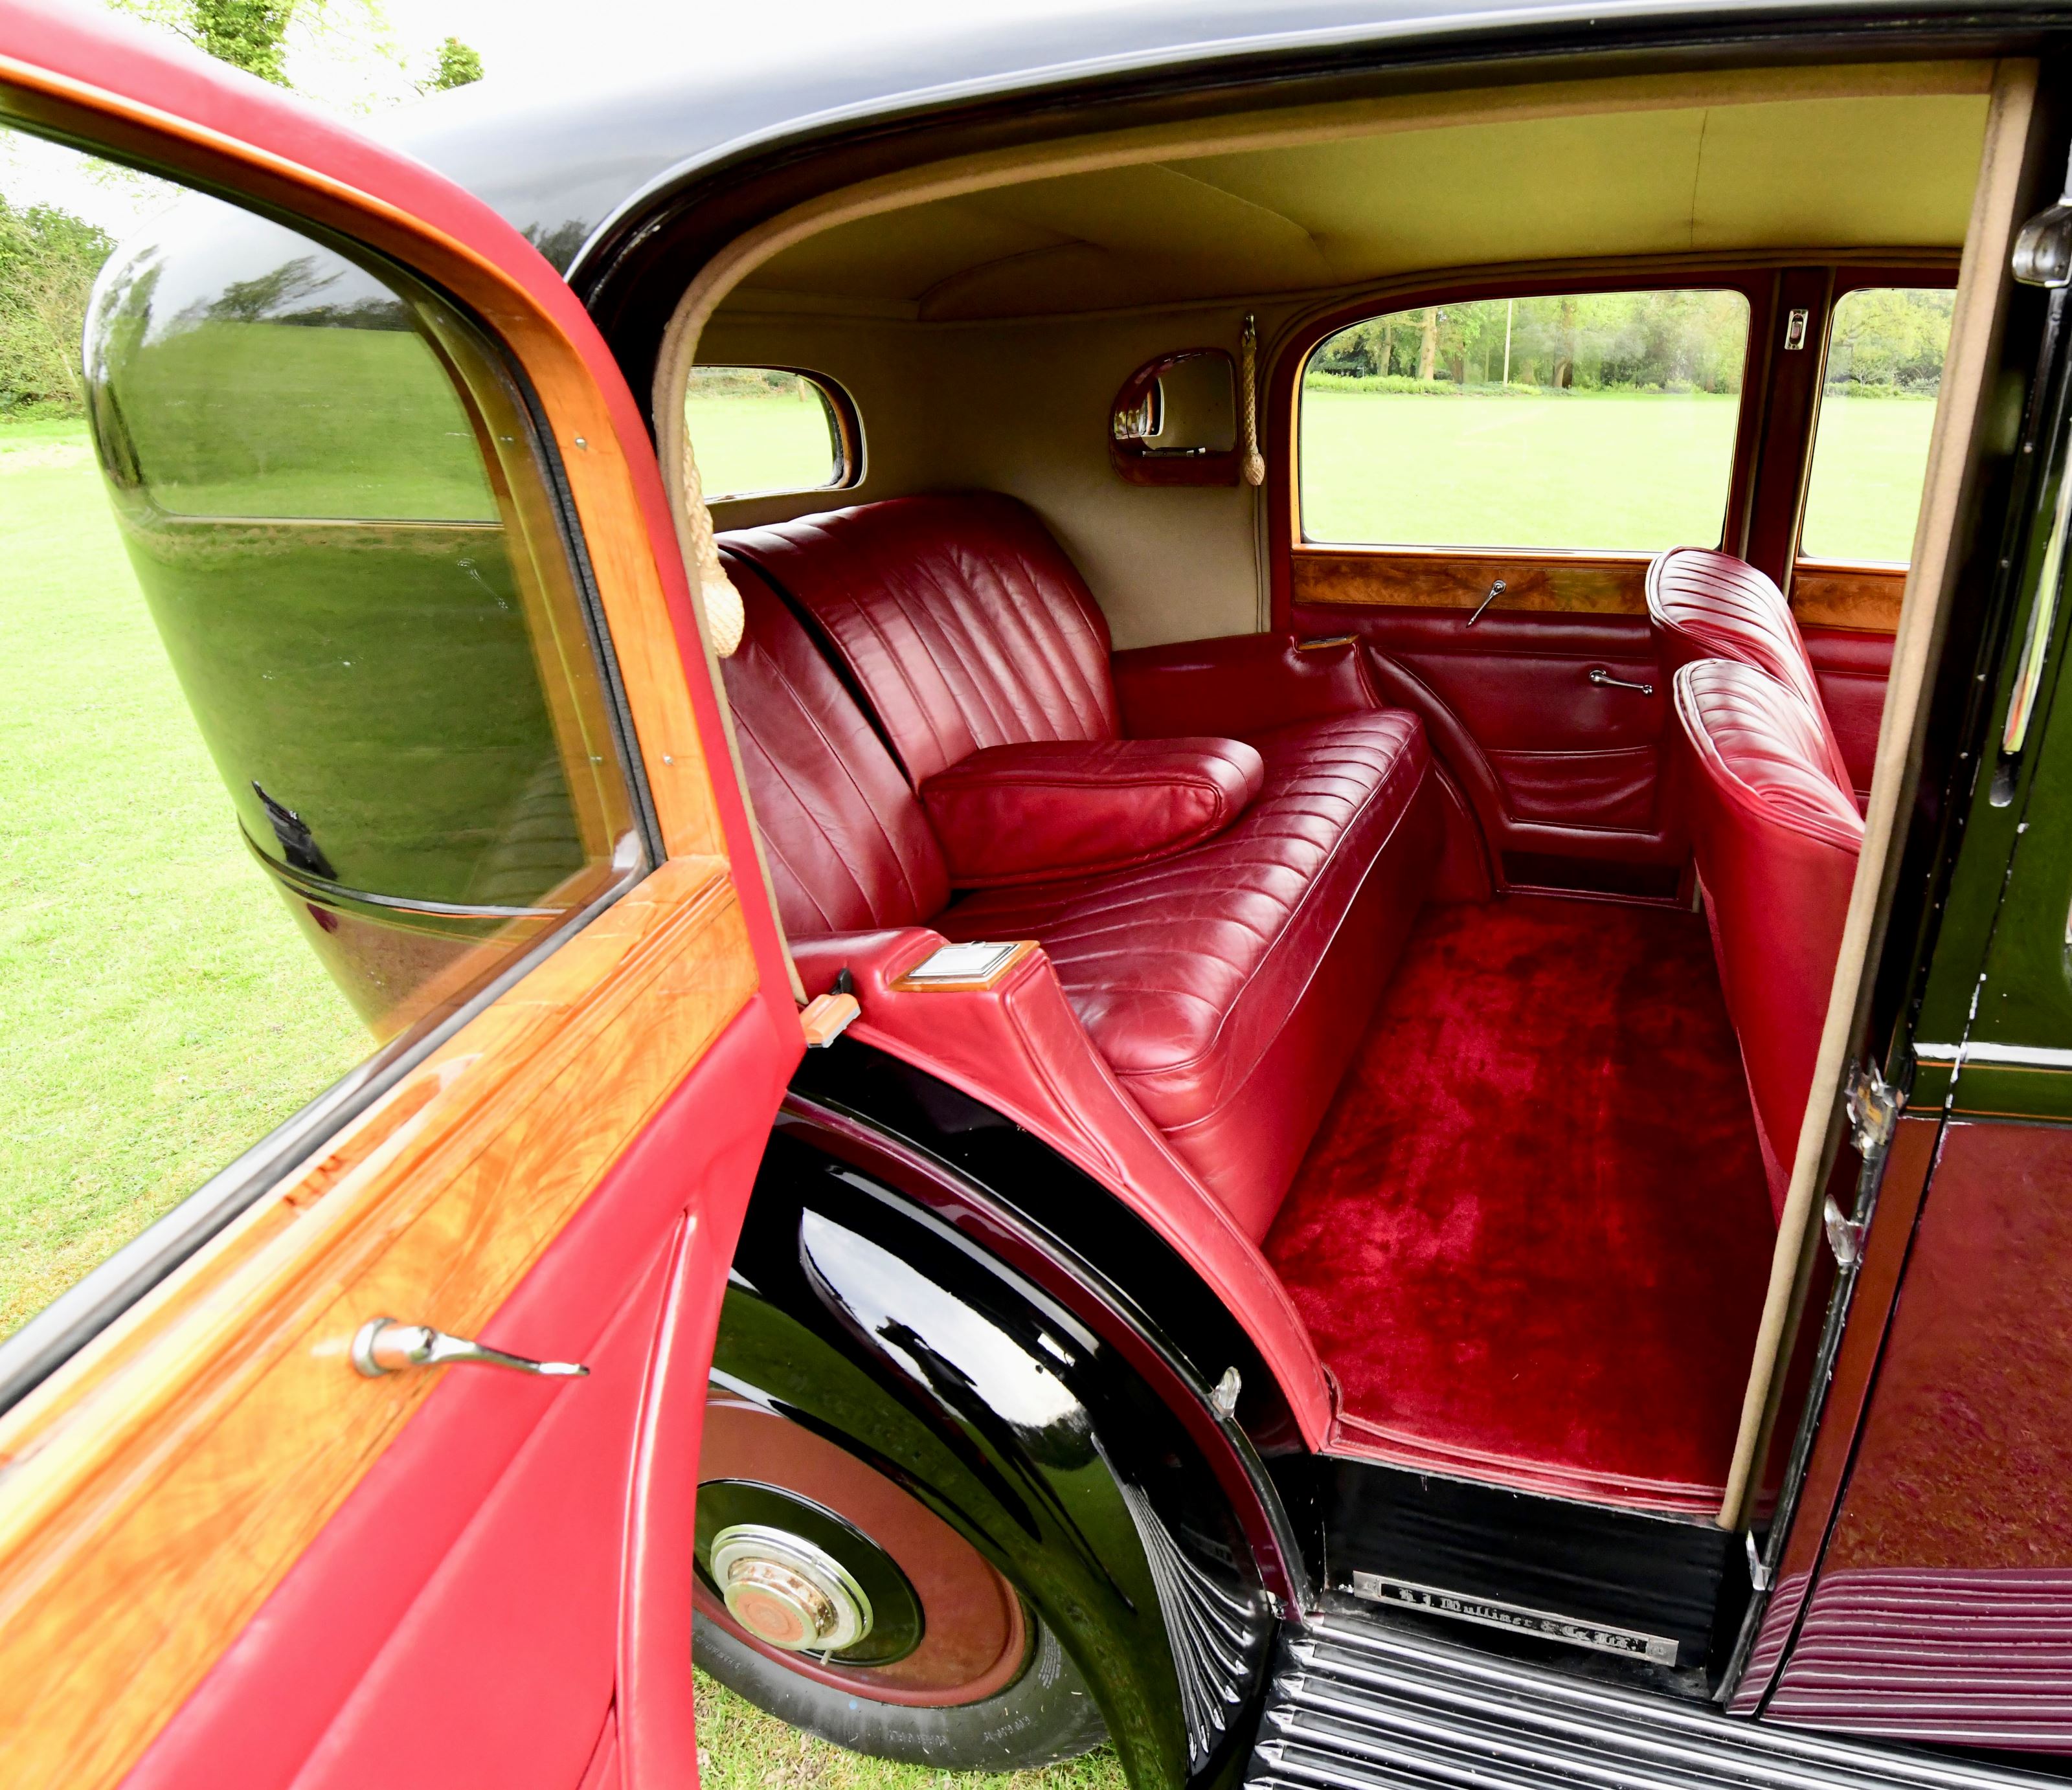 Rolls royce 2530 h.j. mulliner non division sports saloon m46sehpujlol8h229dfv2